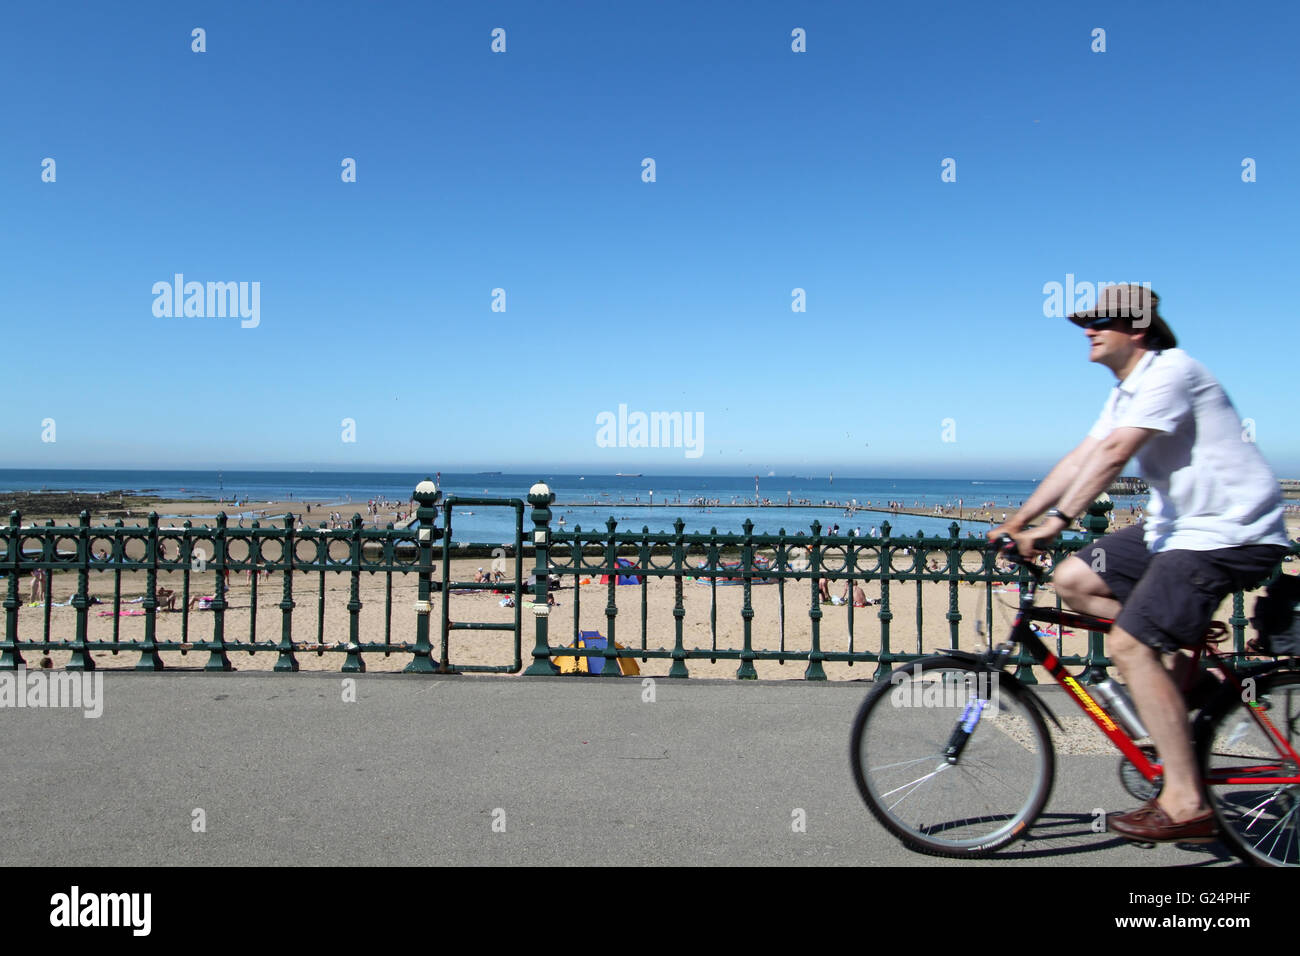 Cyclist on the promenade and people enjoying the sunshine on a sunny day at Margate beach in Kent, England Stock Photo